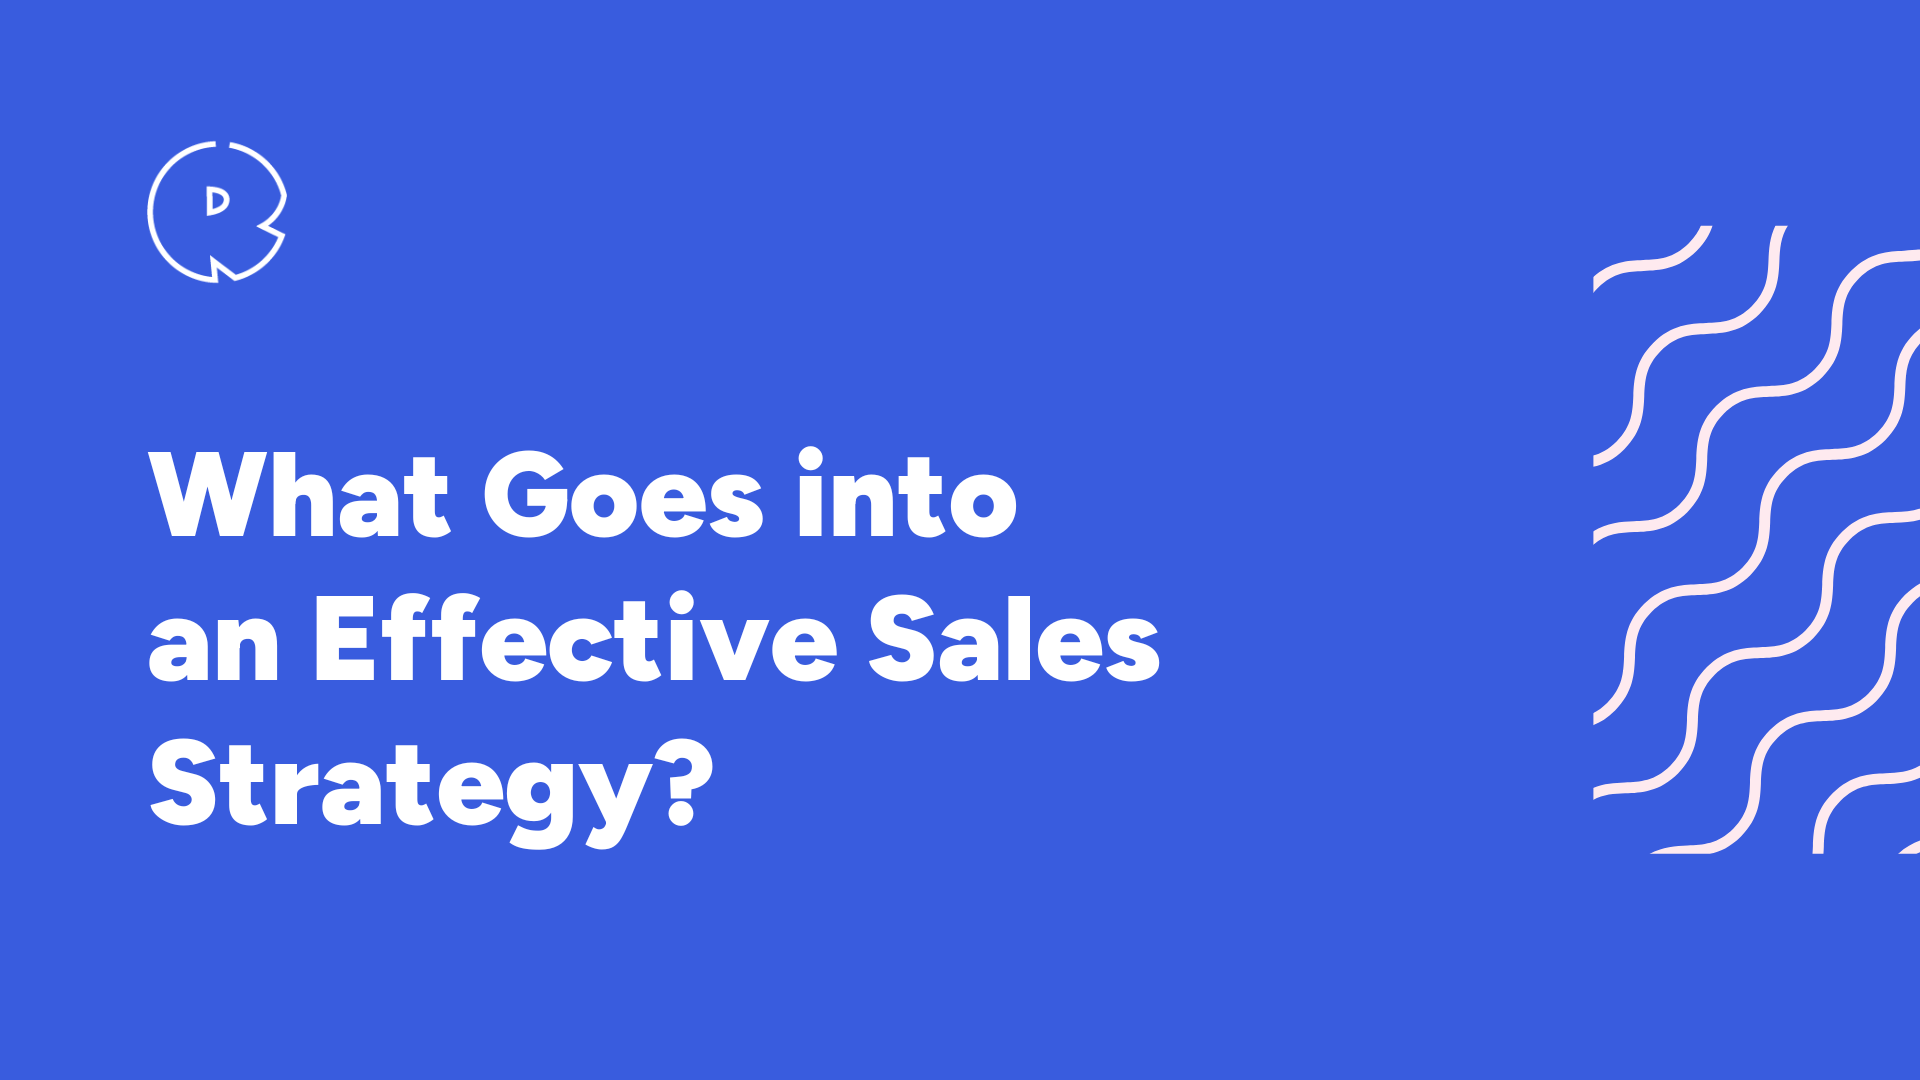 What Goes Into an Effective Sales Strategy?